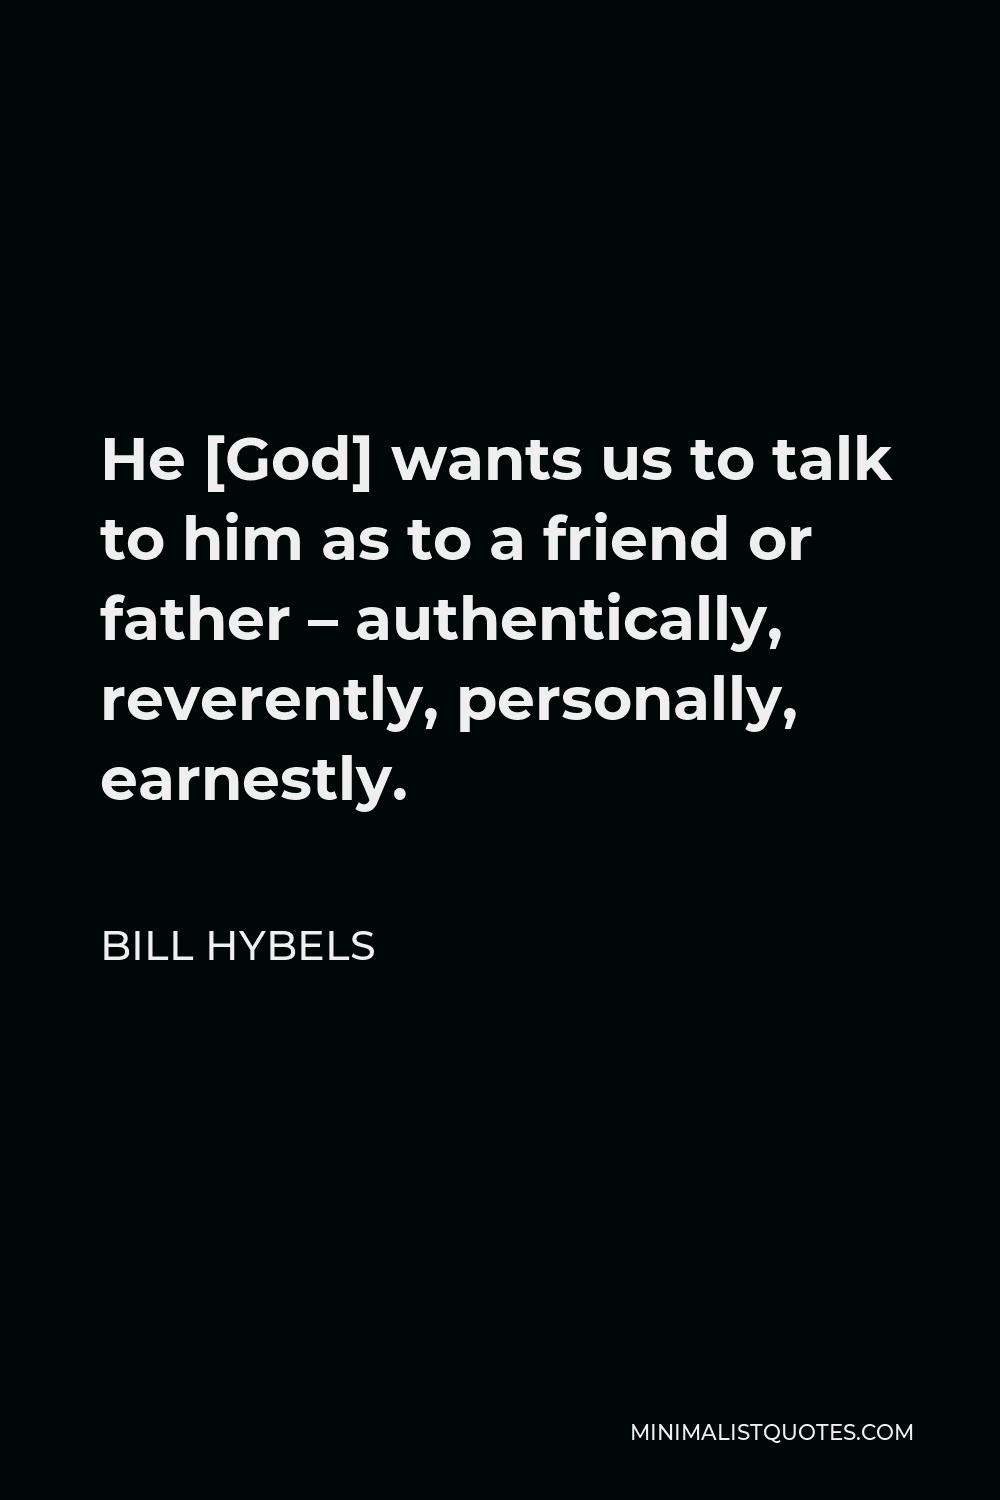 Bill Hybels Quote - He [God] wants us to talk to him as to a friend or father – authentically, reverently, personally, earnestly.